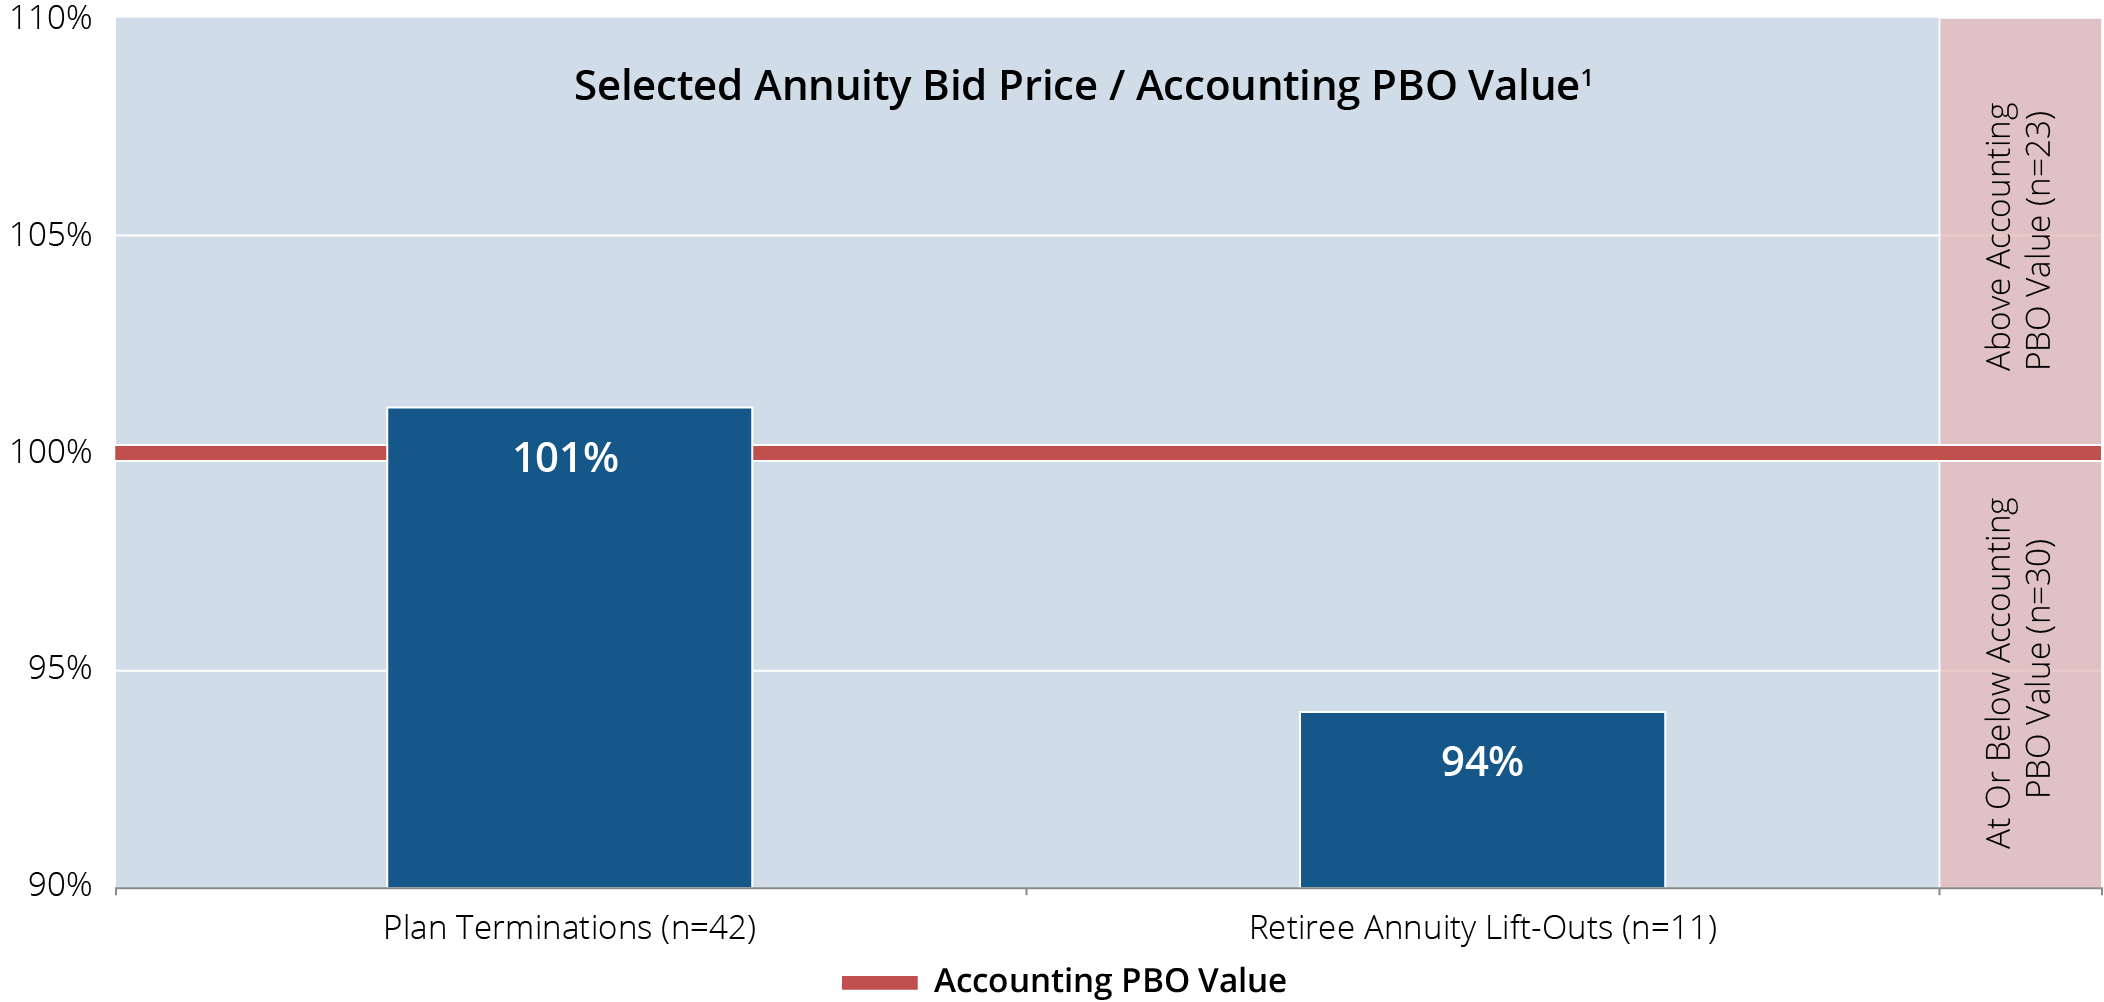 Selected Annuity Bid Price / Accounting PBO Value